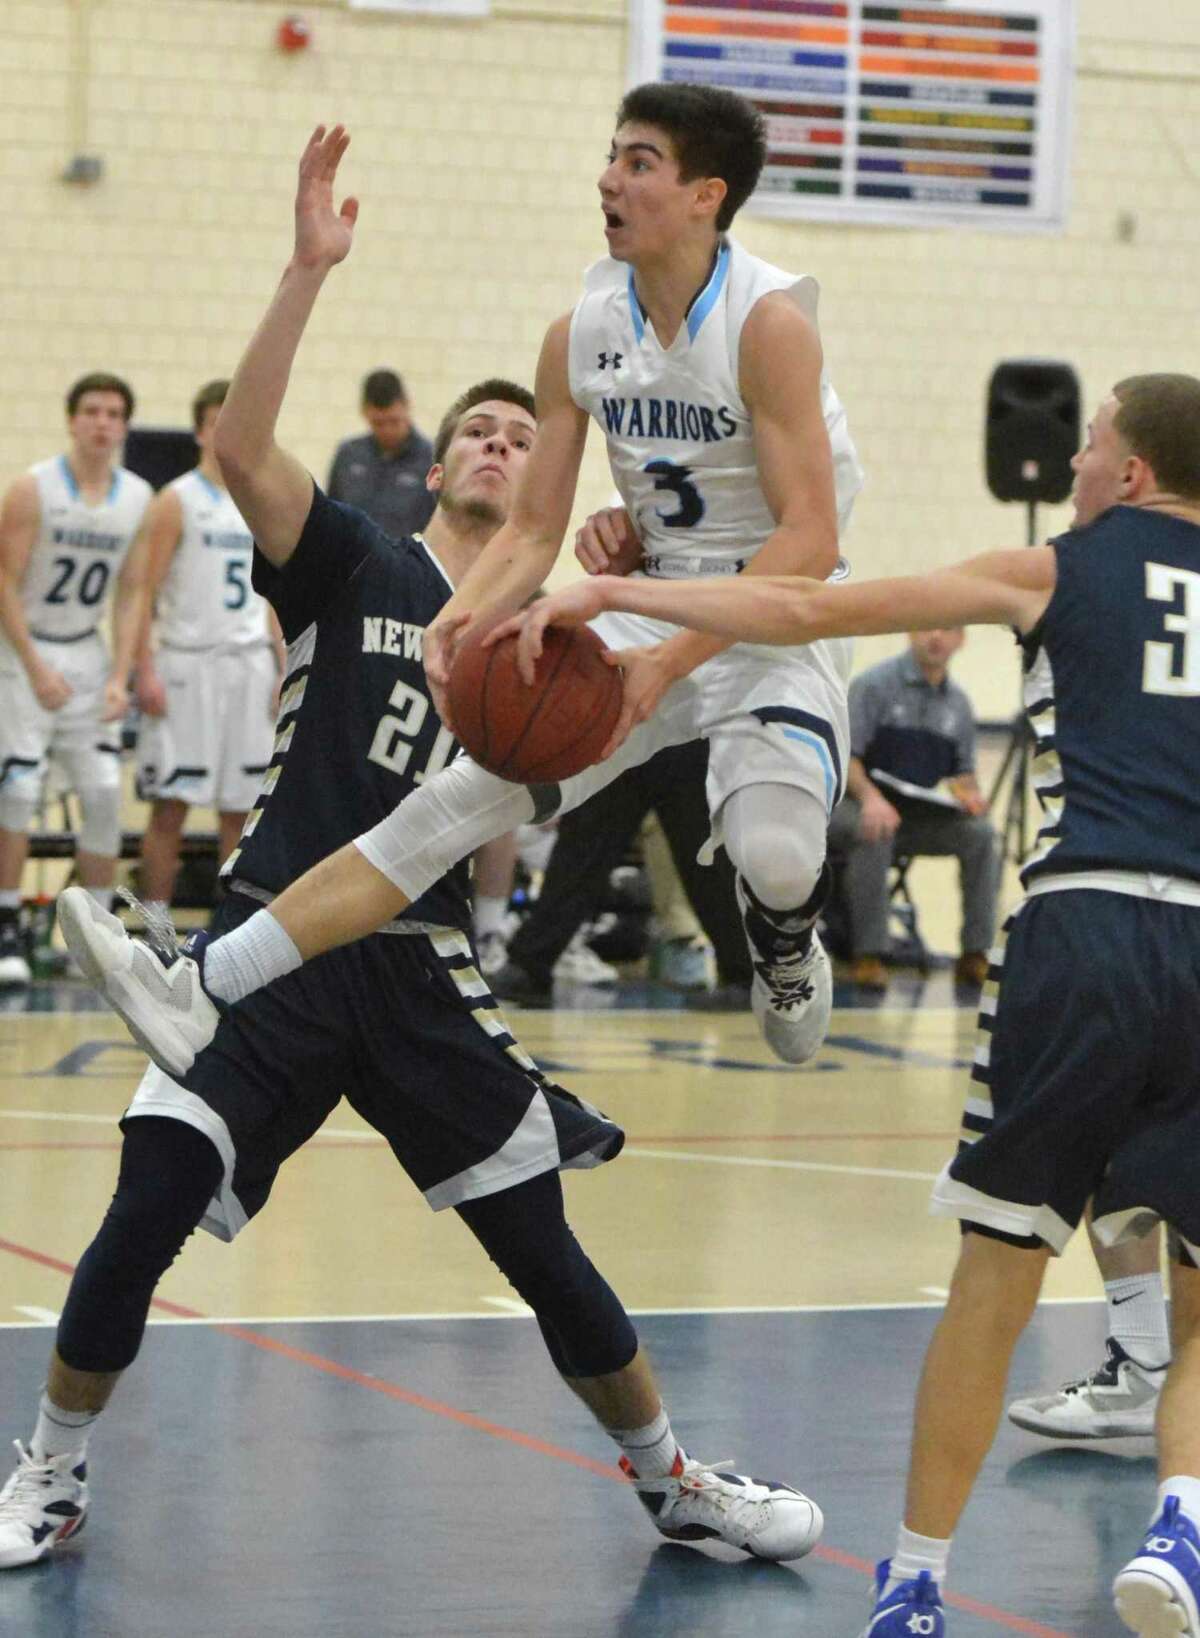 Wilton’s Matt Kronenberg drives to the basket during Class L playoff action vs Newington in Wilton Conn. on Thursday March 9, 2017.